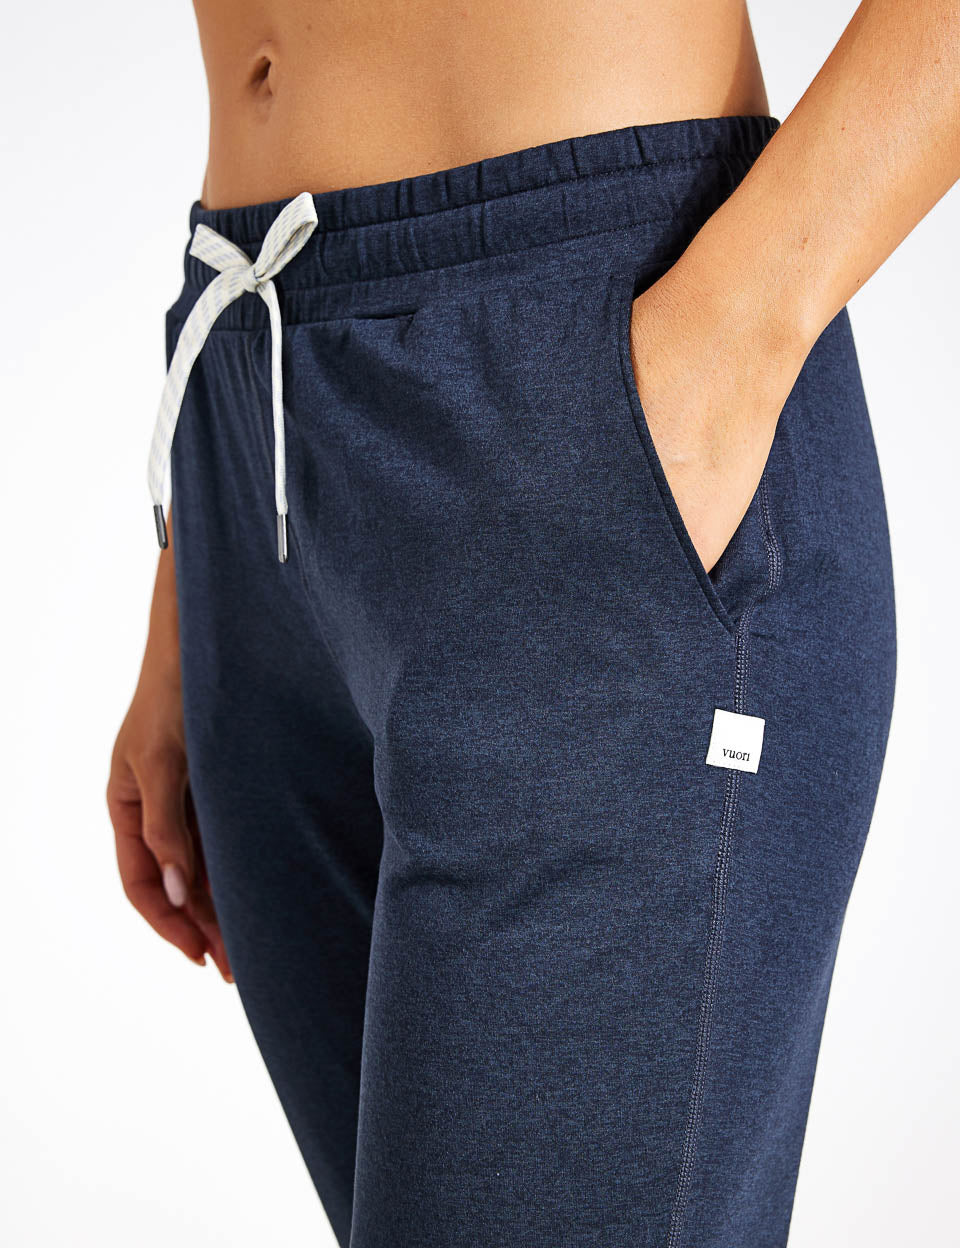 Tempo Performance Jogger, Heather - Baby Blue/White